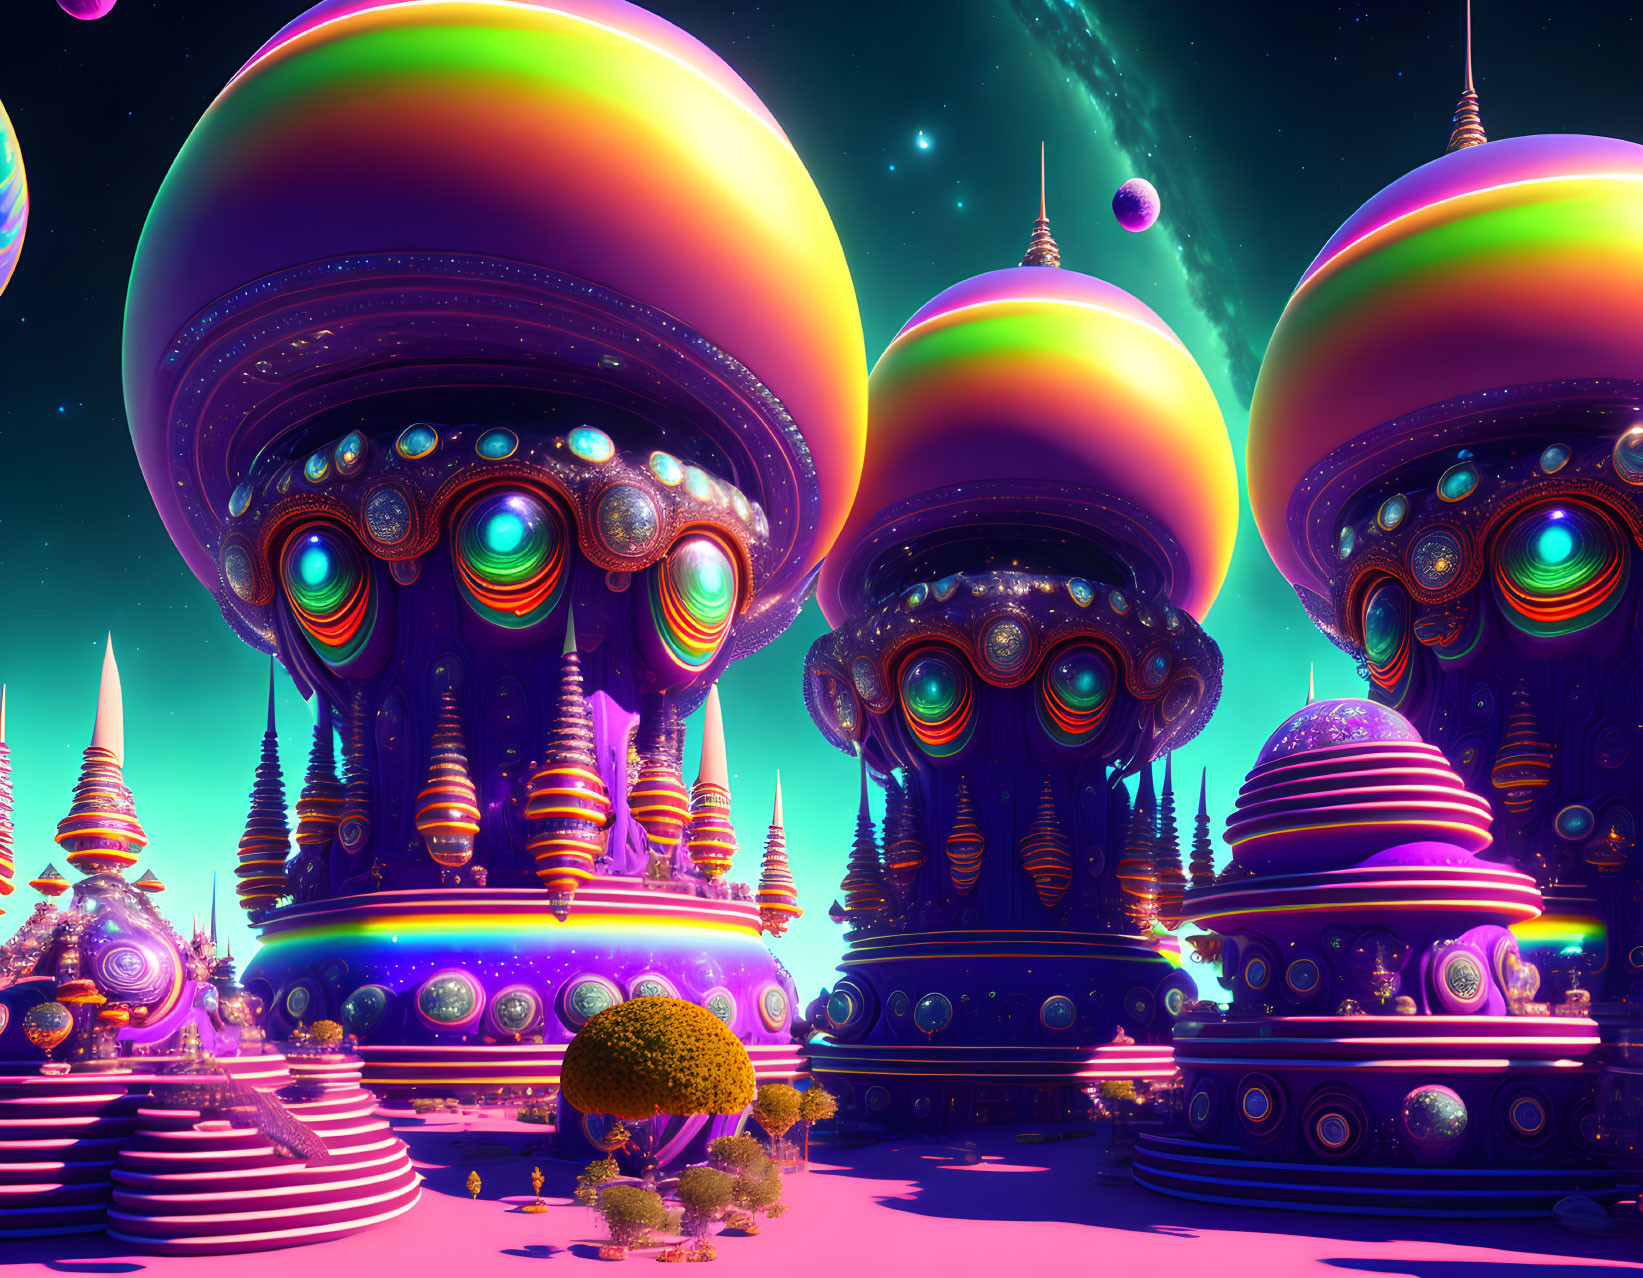 Colorful Alien Landscape with Dome-Shaped Structures Under Starry Sky